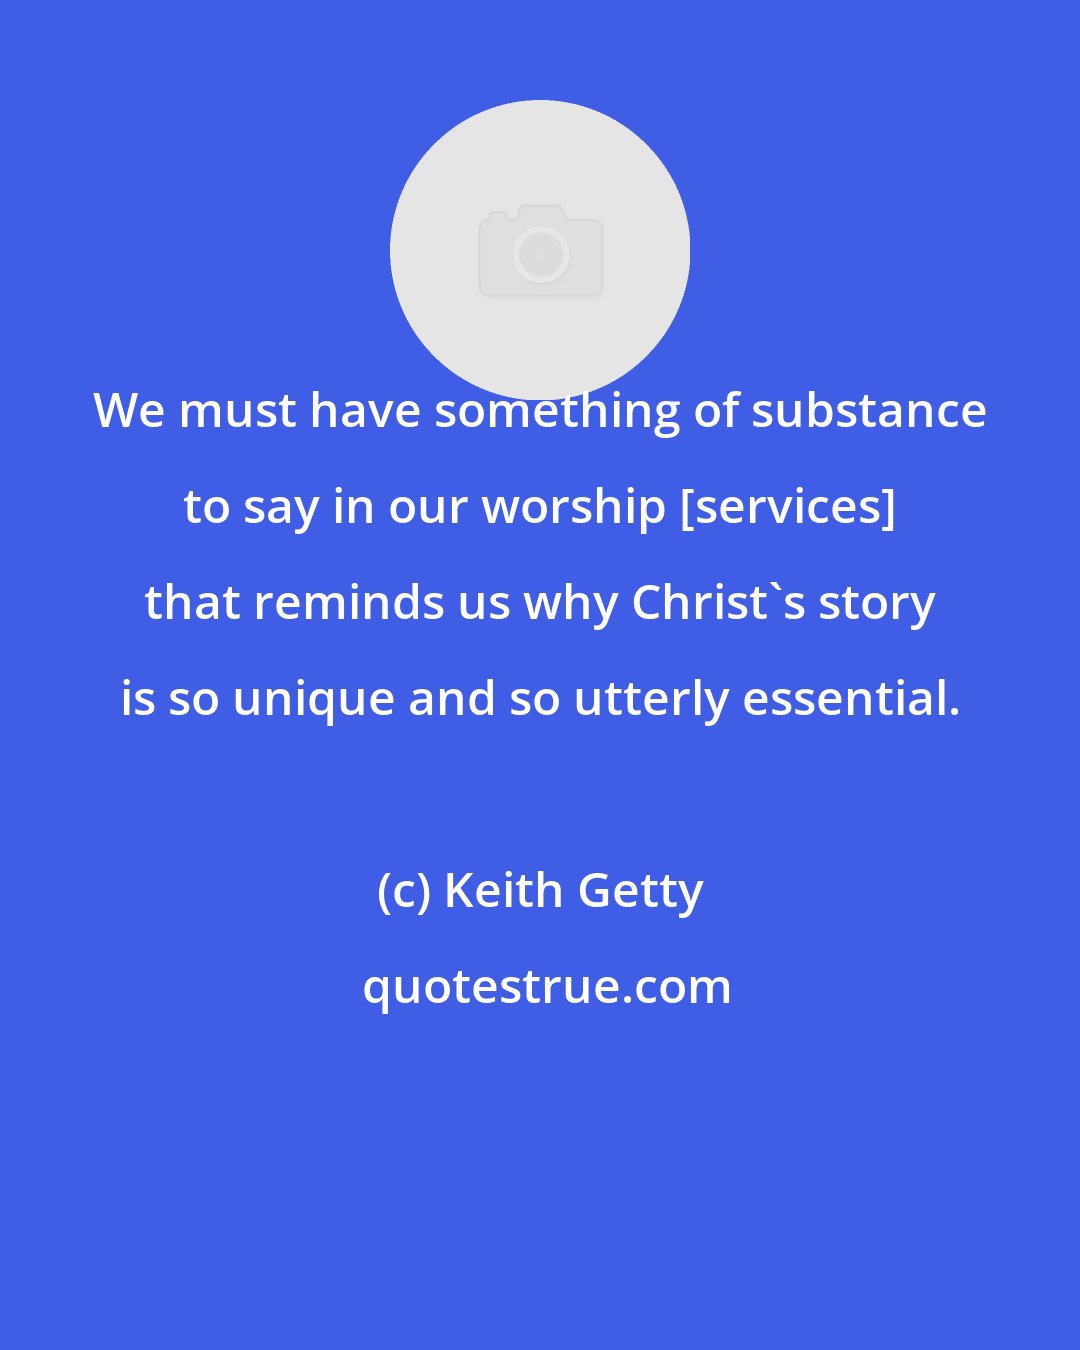 Keith Getty: We must have something of substance to say in our worship [services] that reminds us why Christ's story is so unique and so utterly essential.